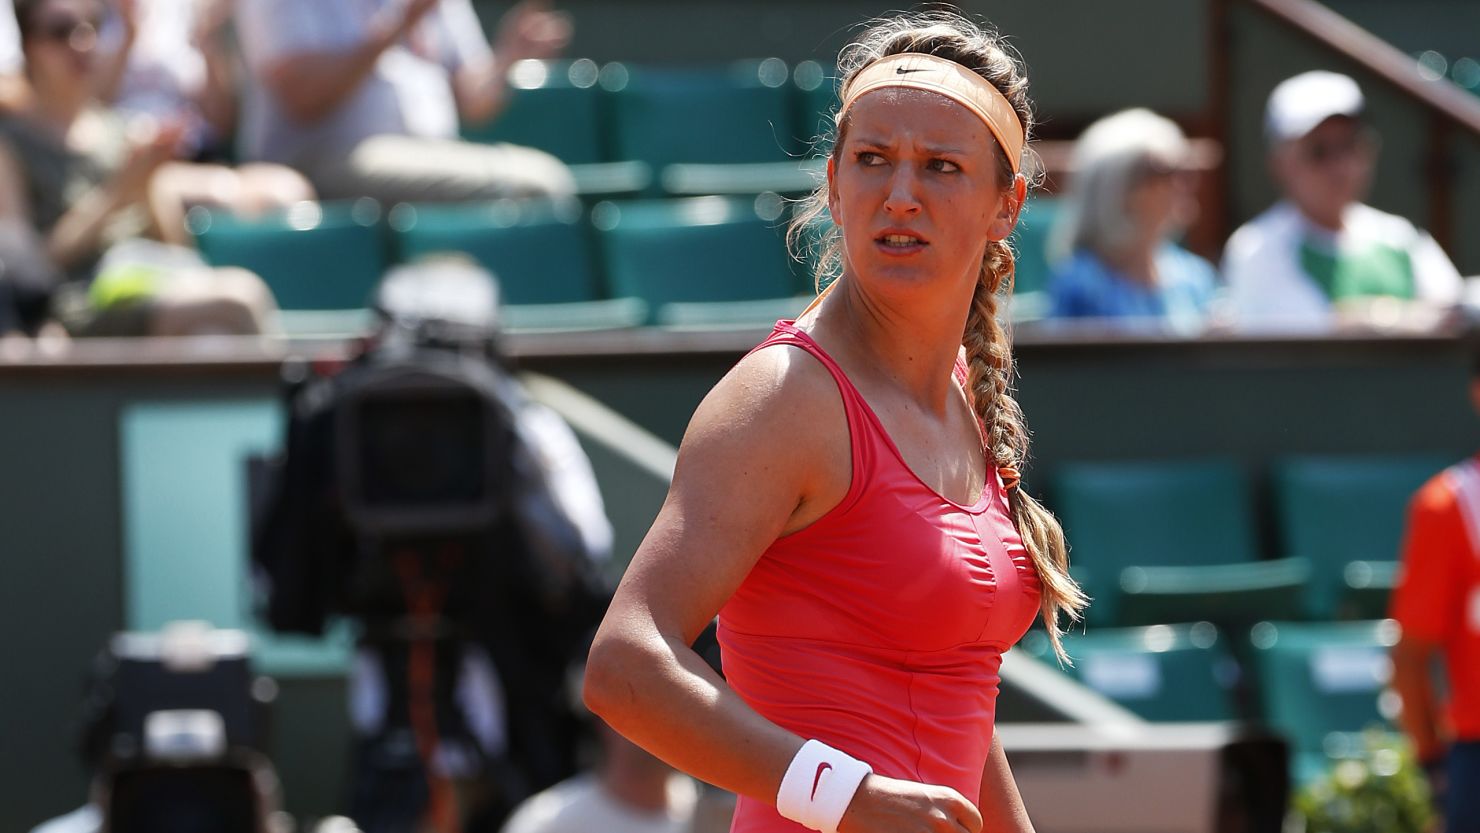 World No. 1 Victoria Azarenka made hard work of her opening round match at the French Open